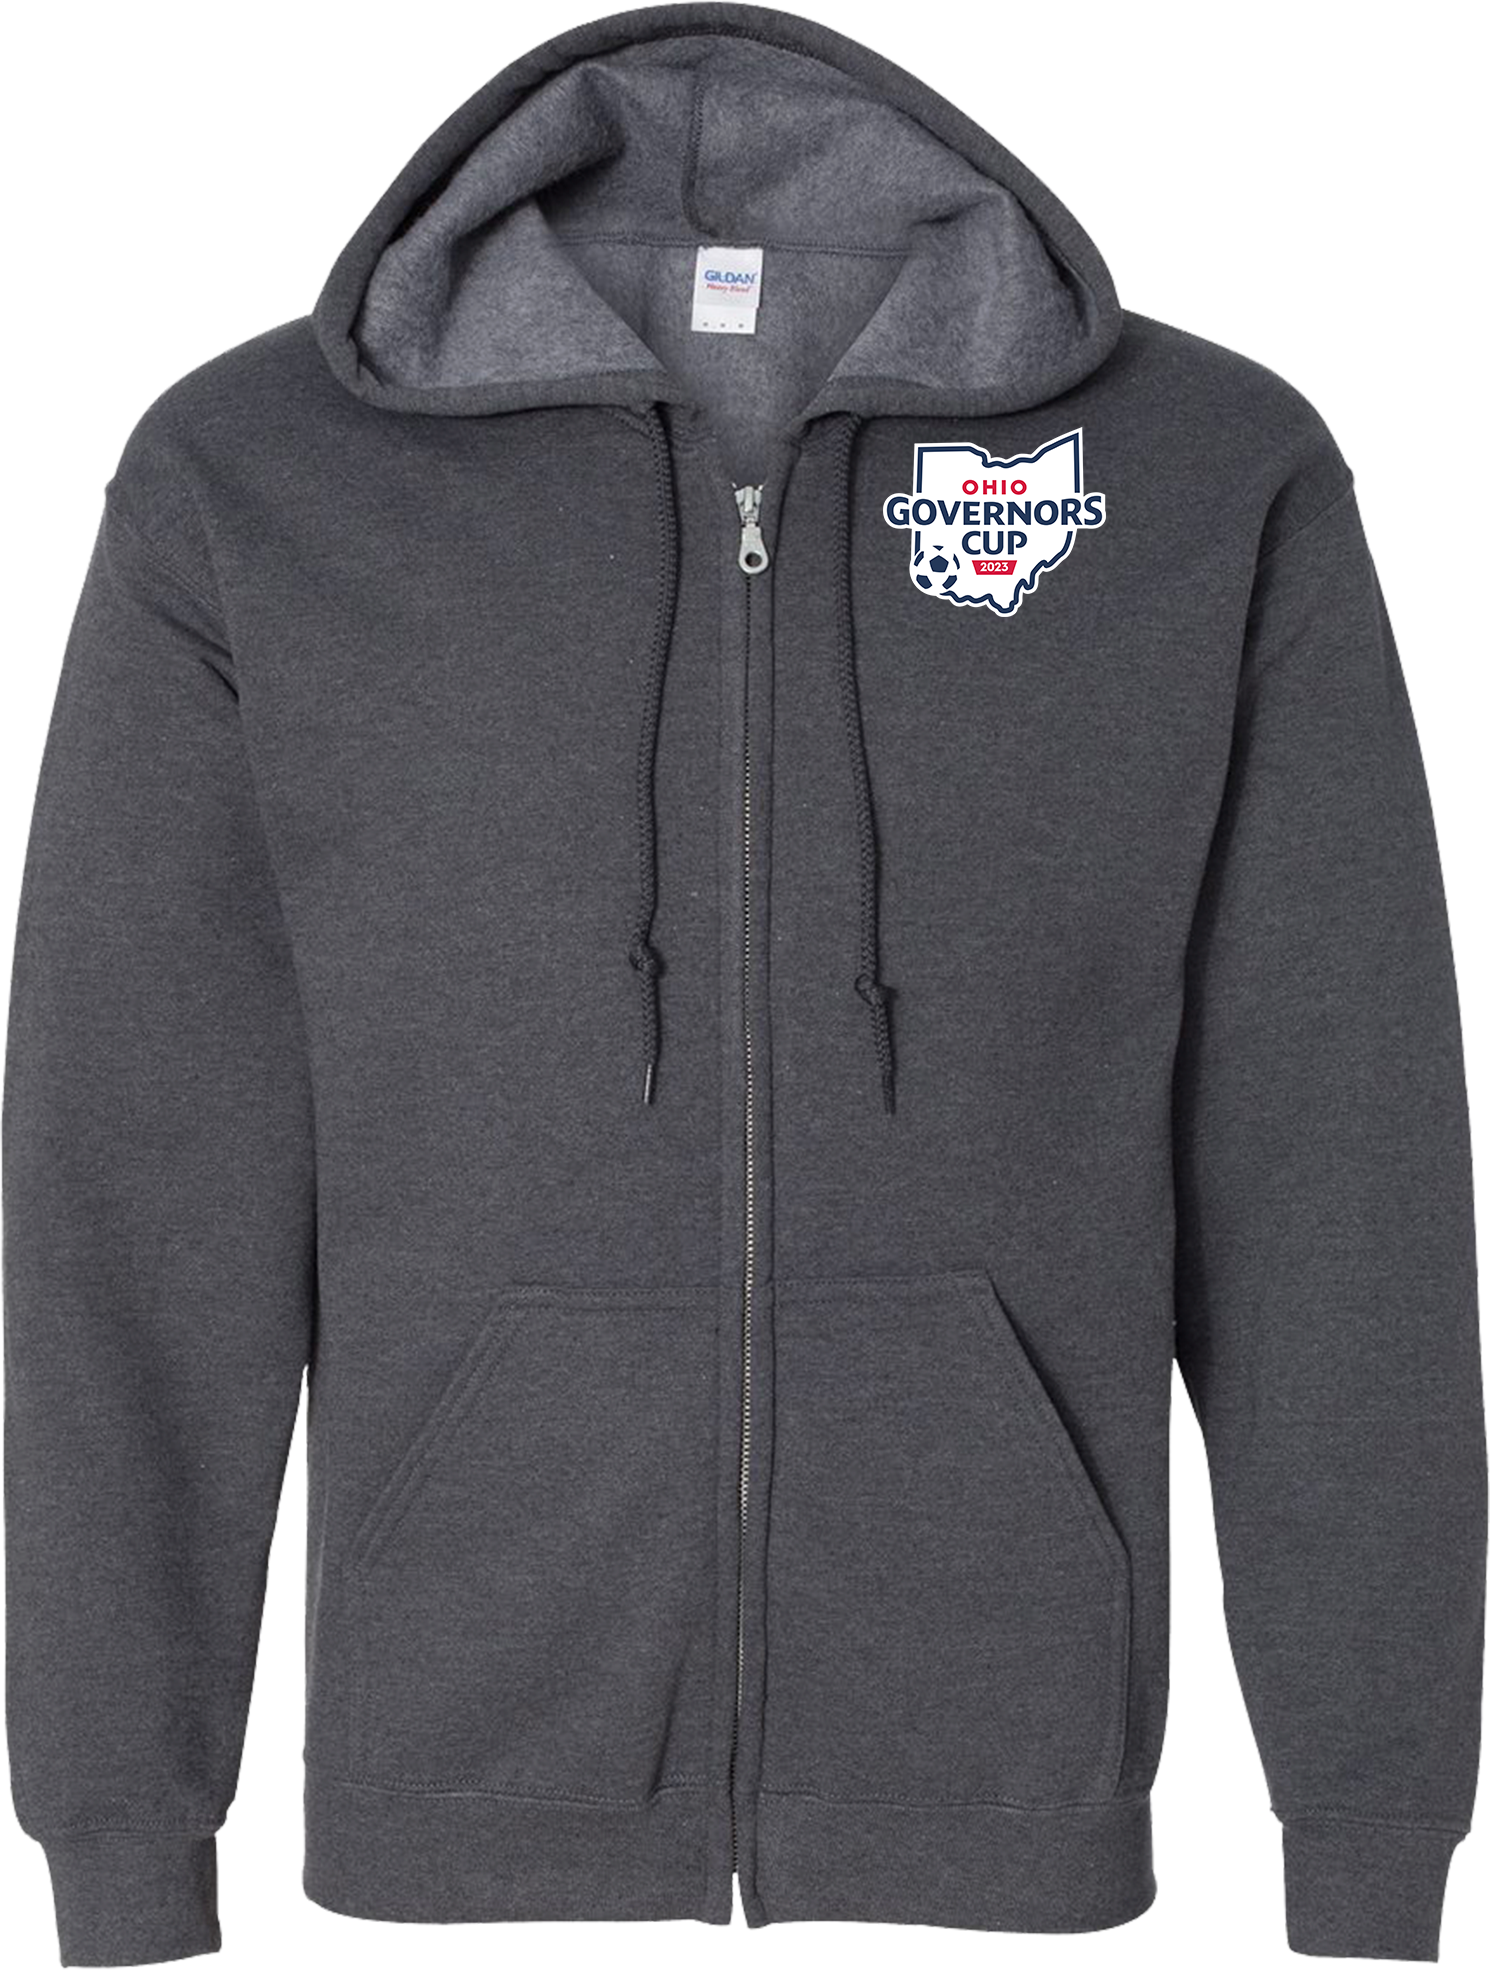 FULL ZIP HOODIES - 2023 USYS Ohio Governors Cup